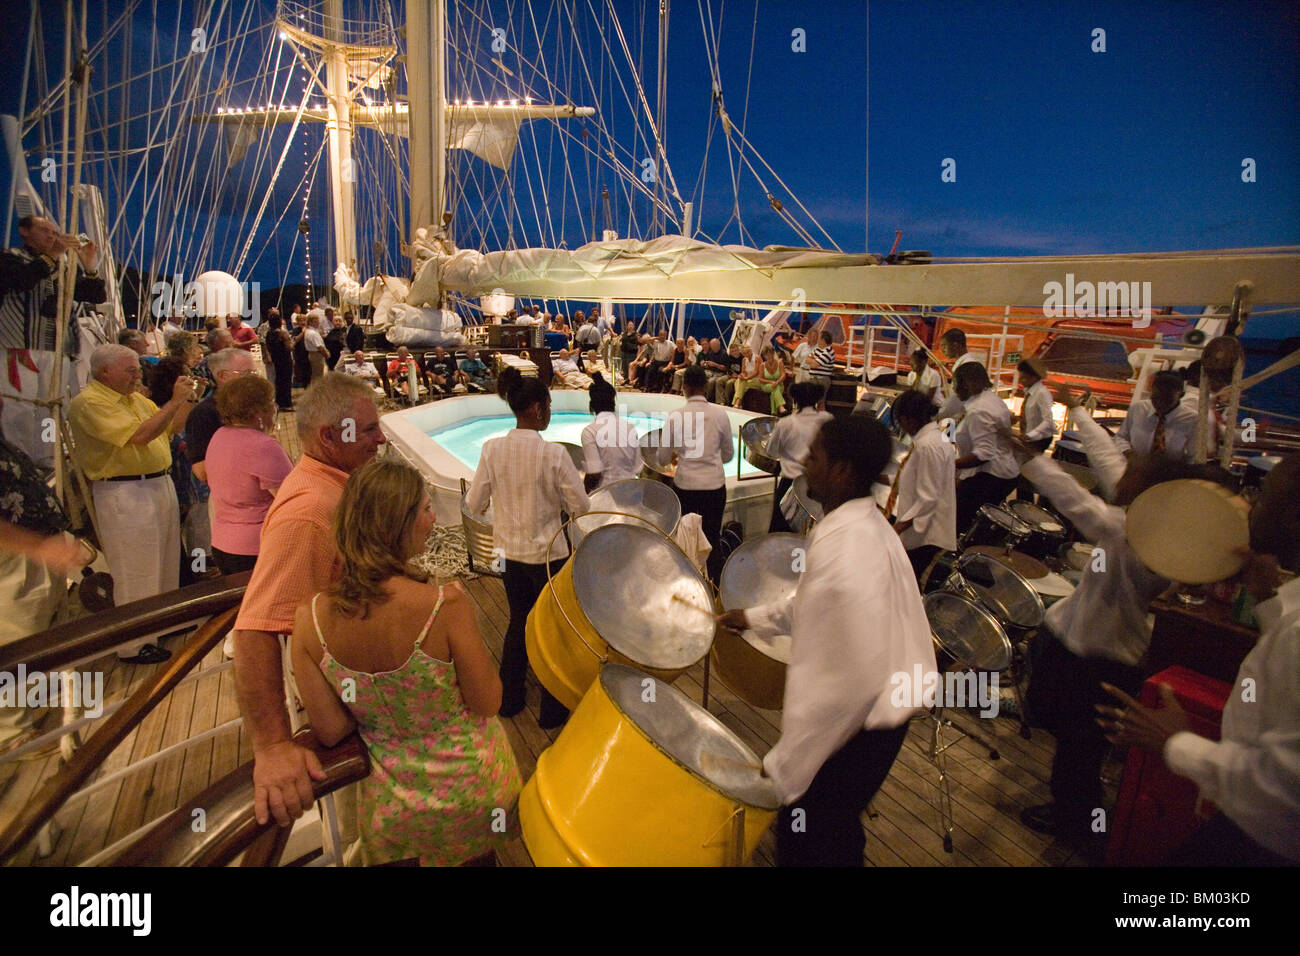 Steel Drum Band on Deck, Aboard Star Clipper, Falmouth Harbour, Antigua Stock Photo